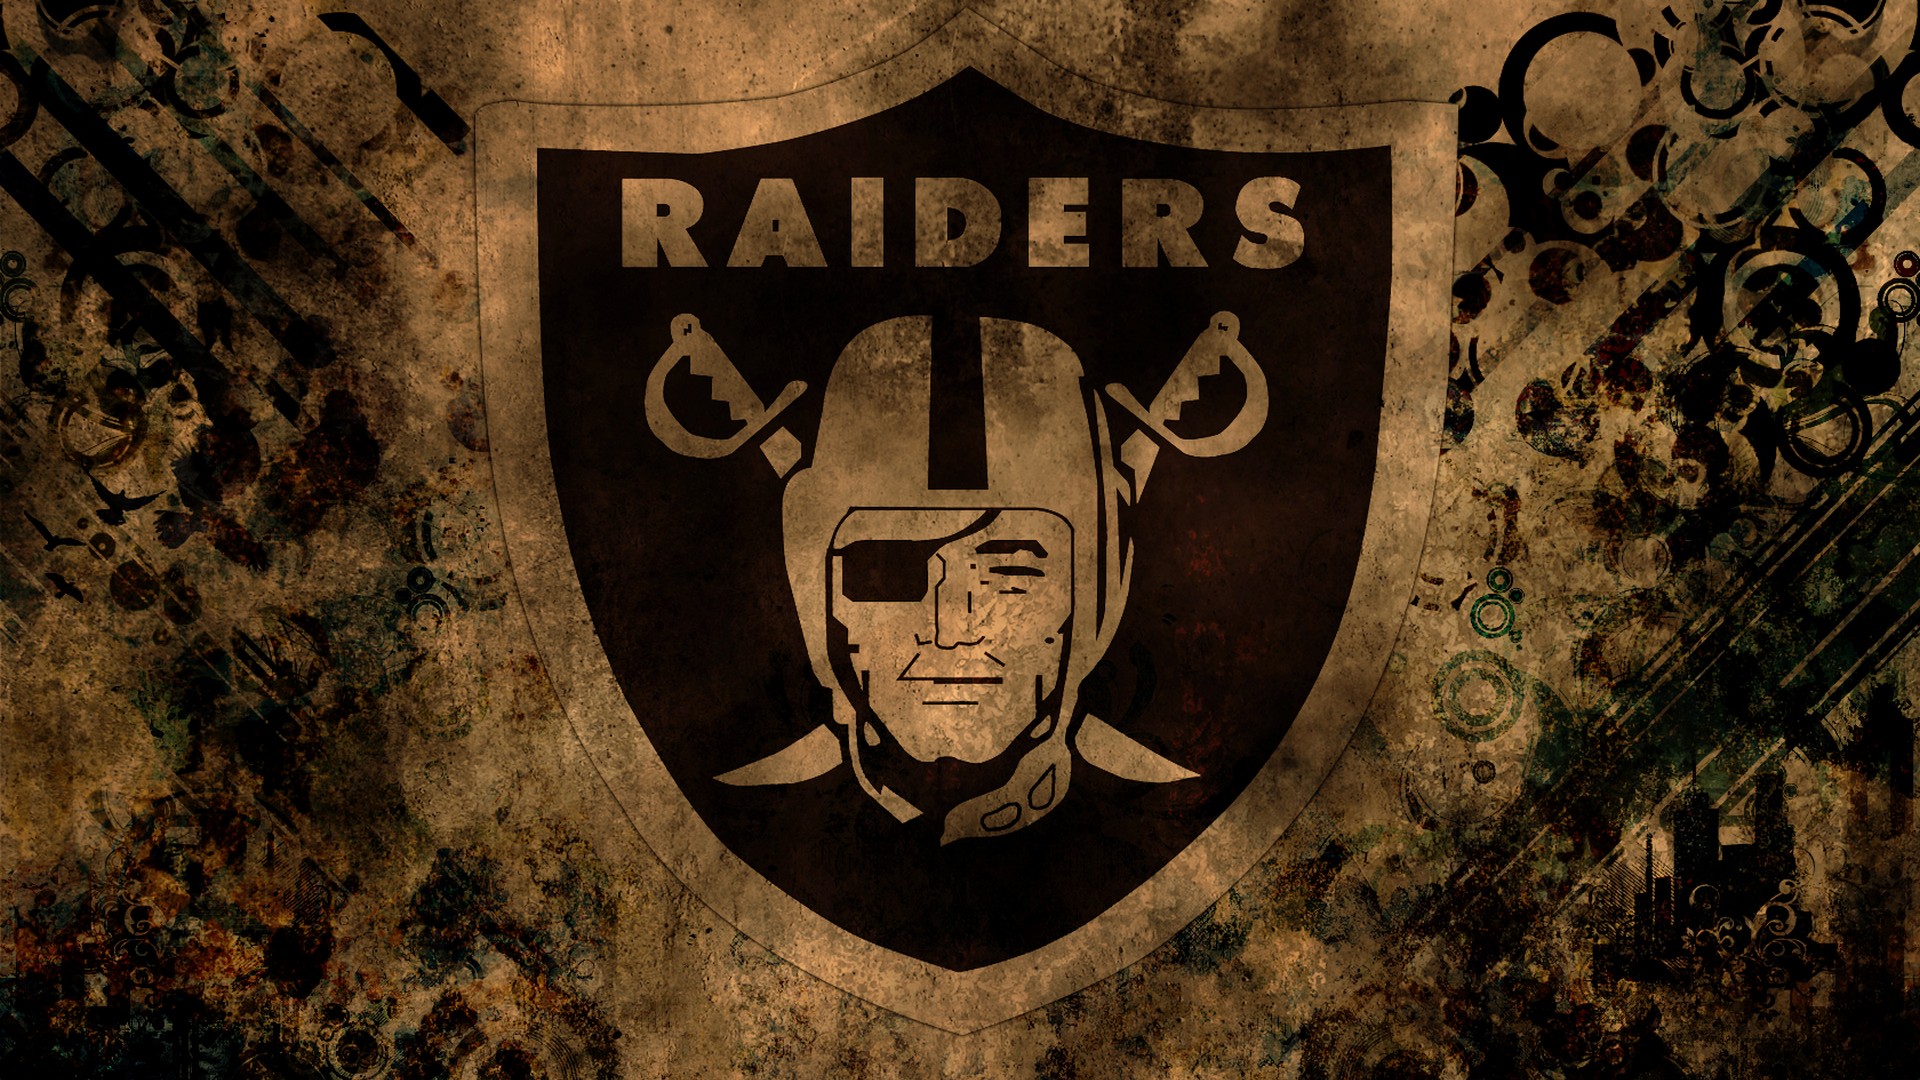 Wallpaper Desktop Oakland Raiders NFL HD With high-resolution 1920X1080 pixel. You can use this wallpaper for your Mac or Windows Desktop Background, iPhone, Android or Tablet and another Smartphone device